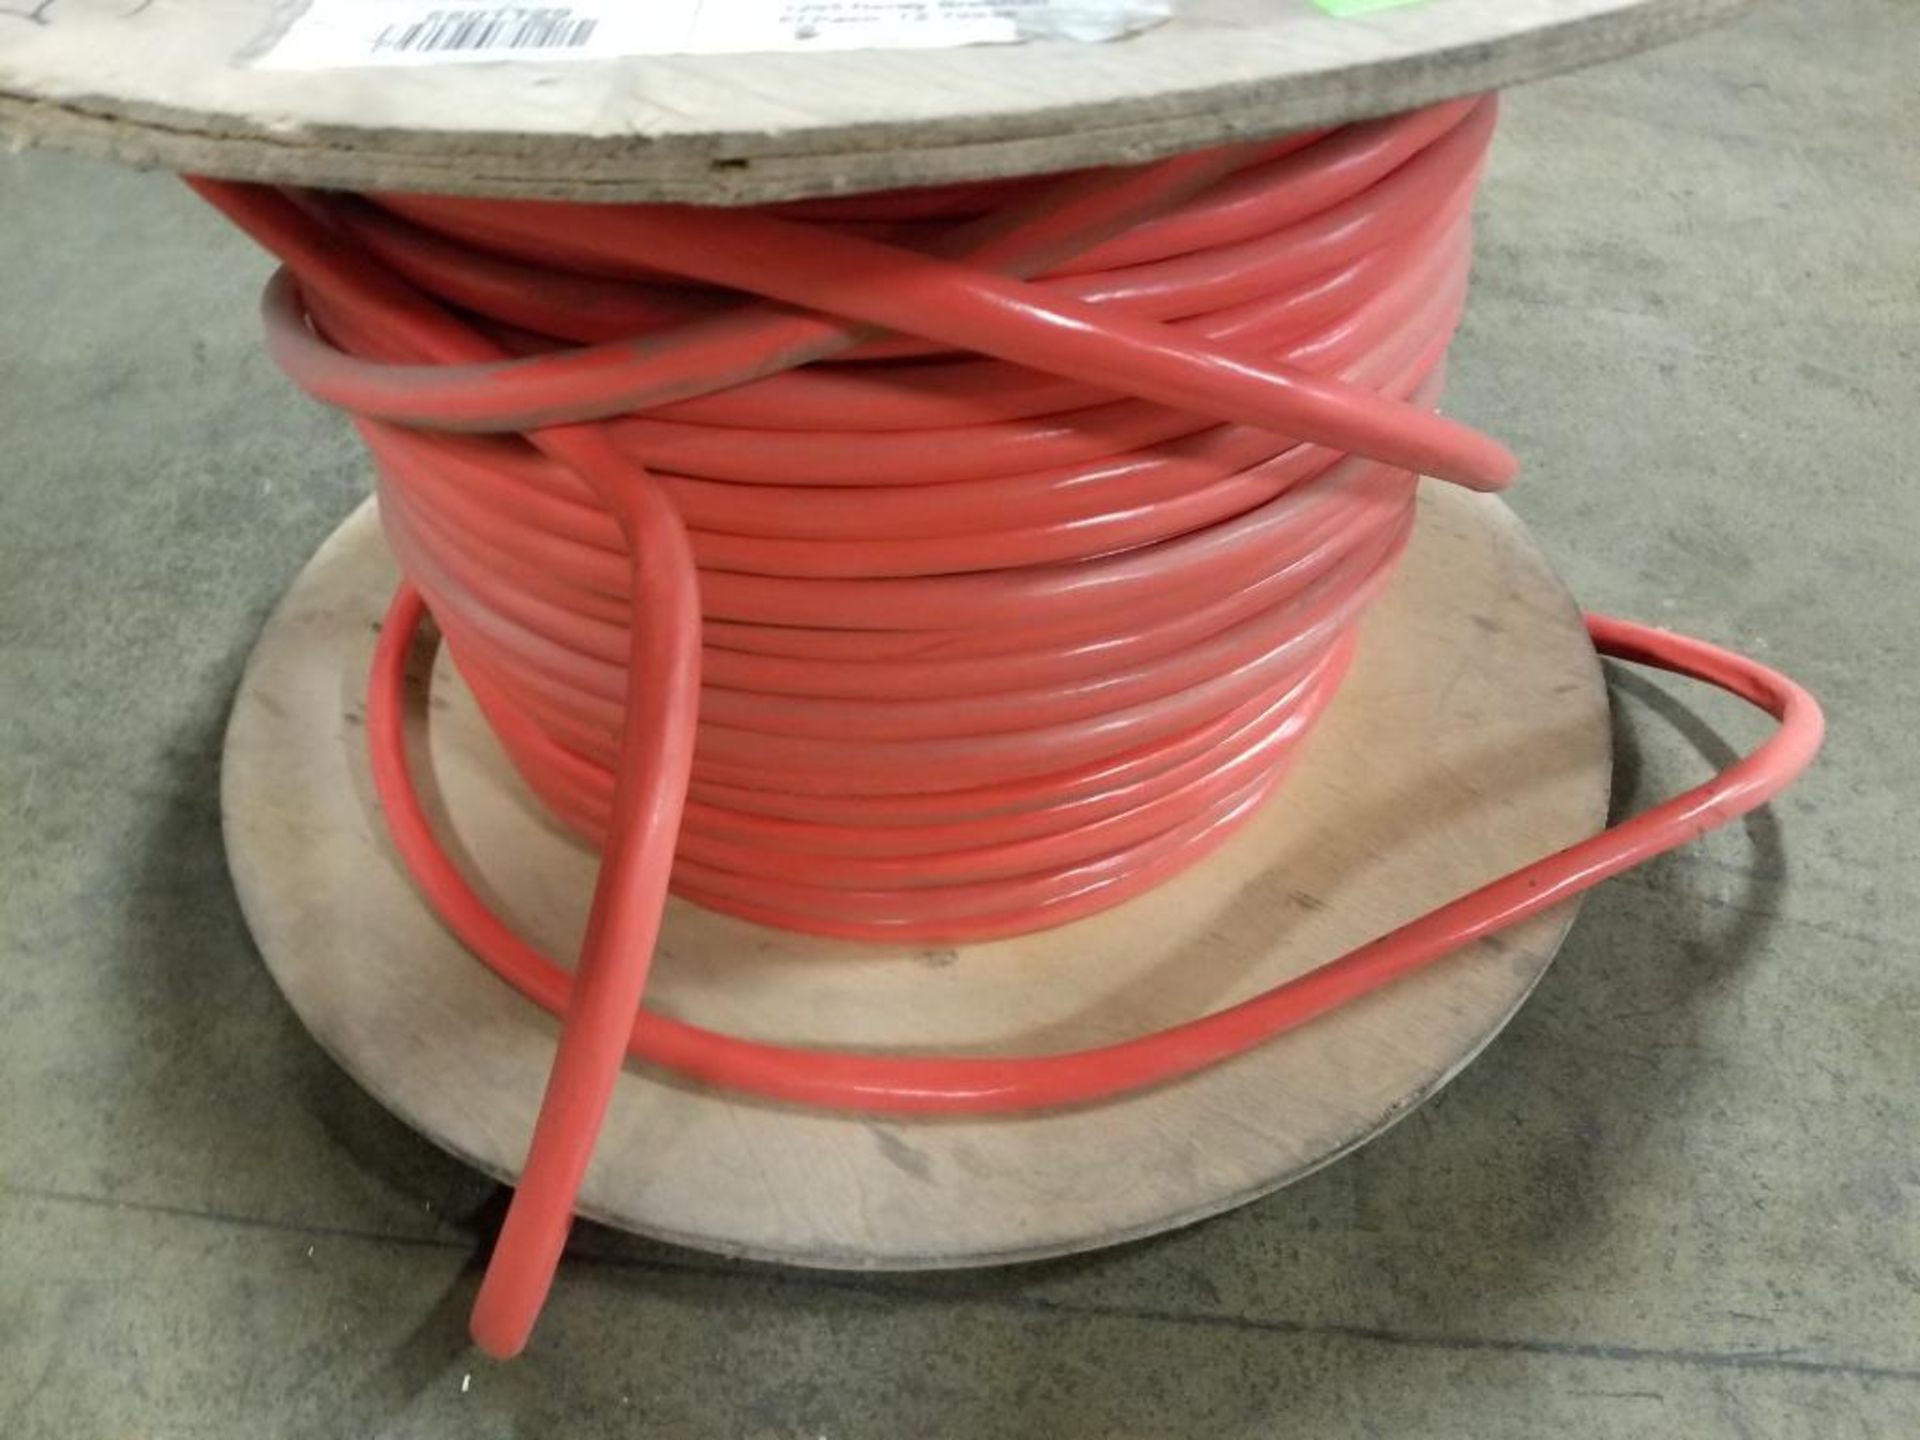 Roll of electrical wire. 100LBS. Approx. 500FT. - Image 8 of 9